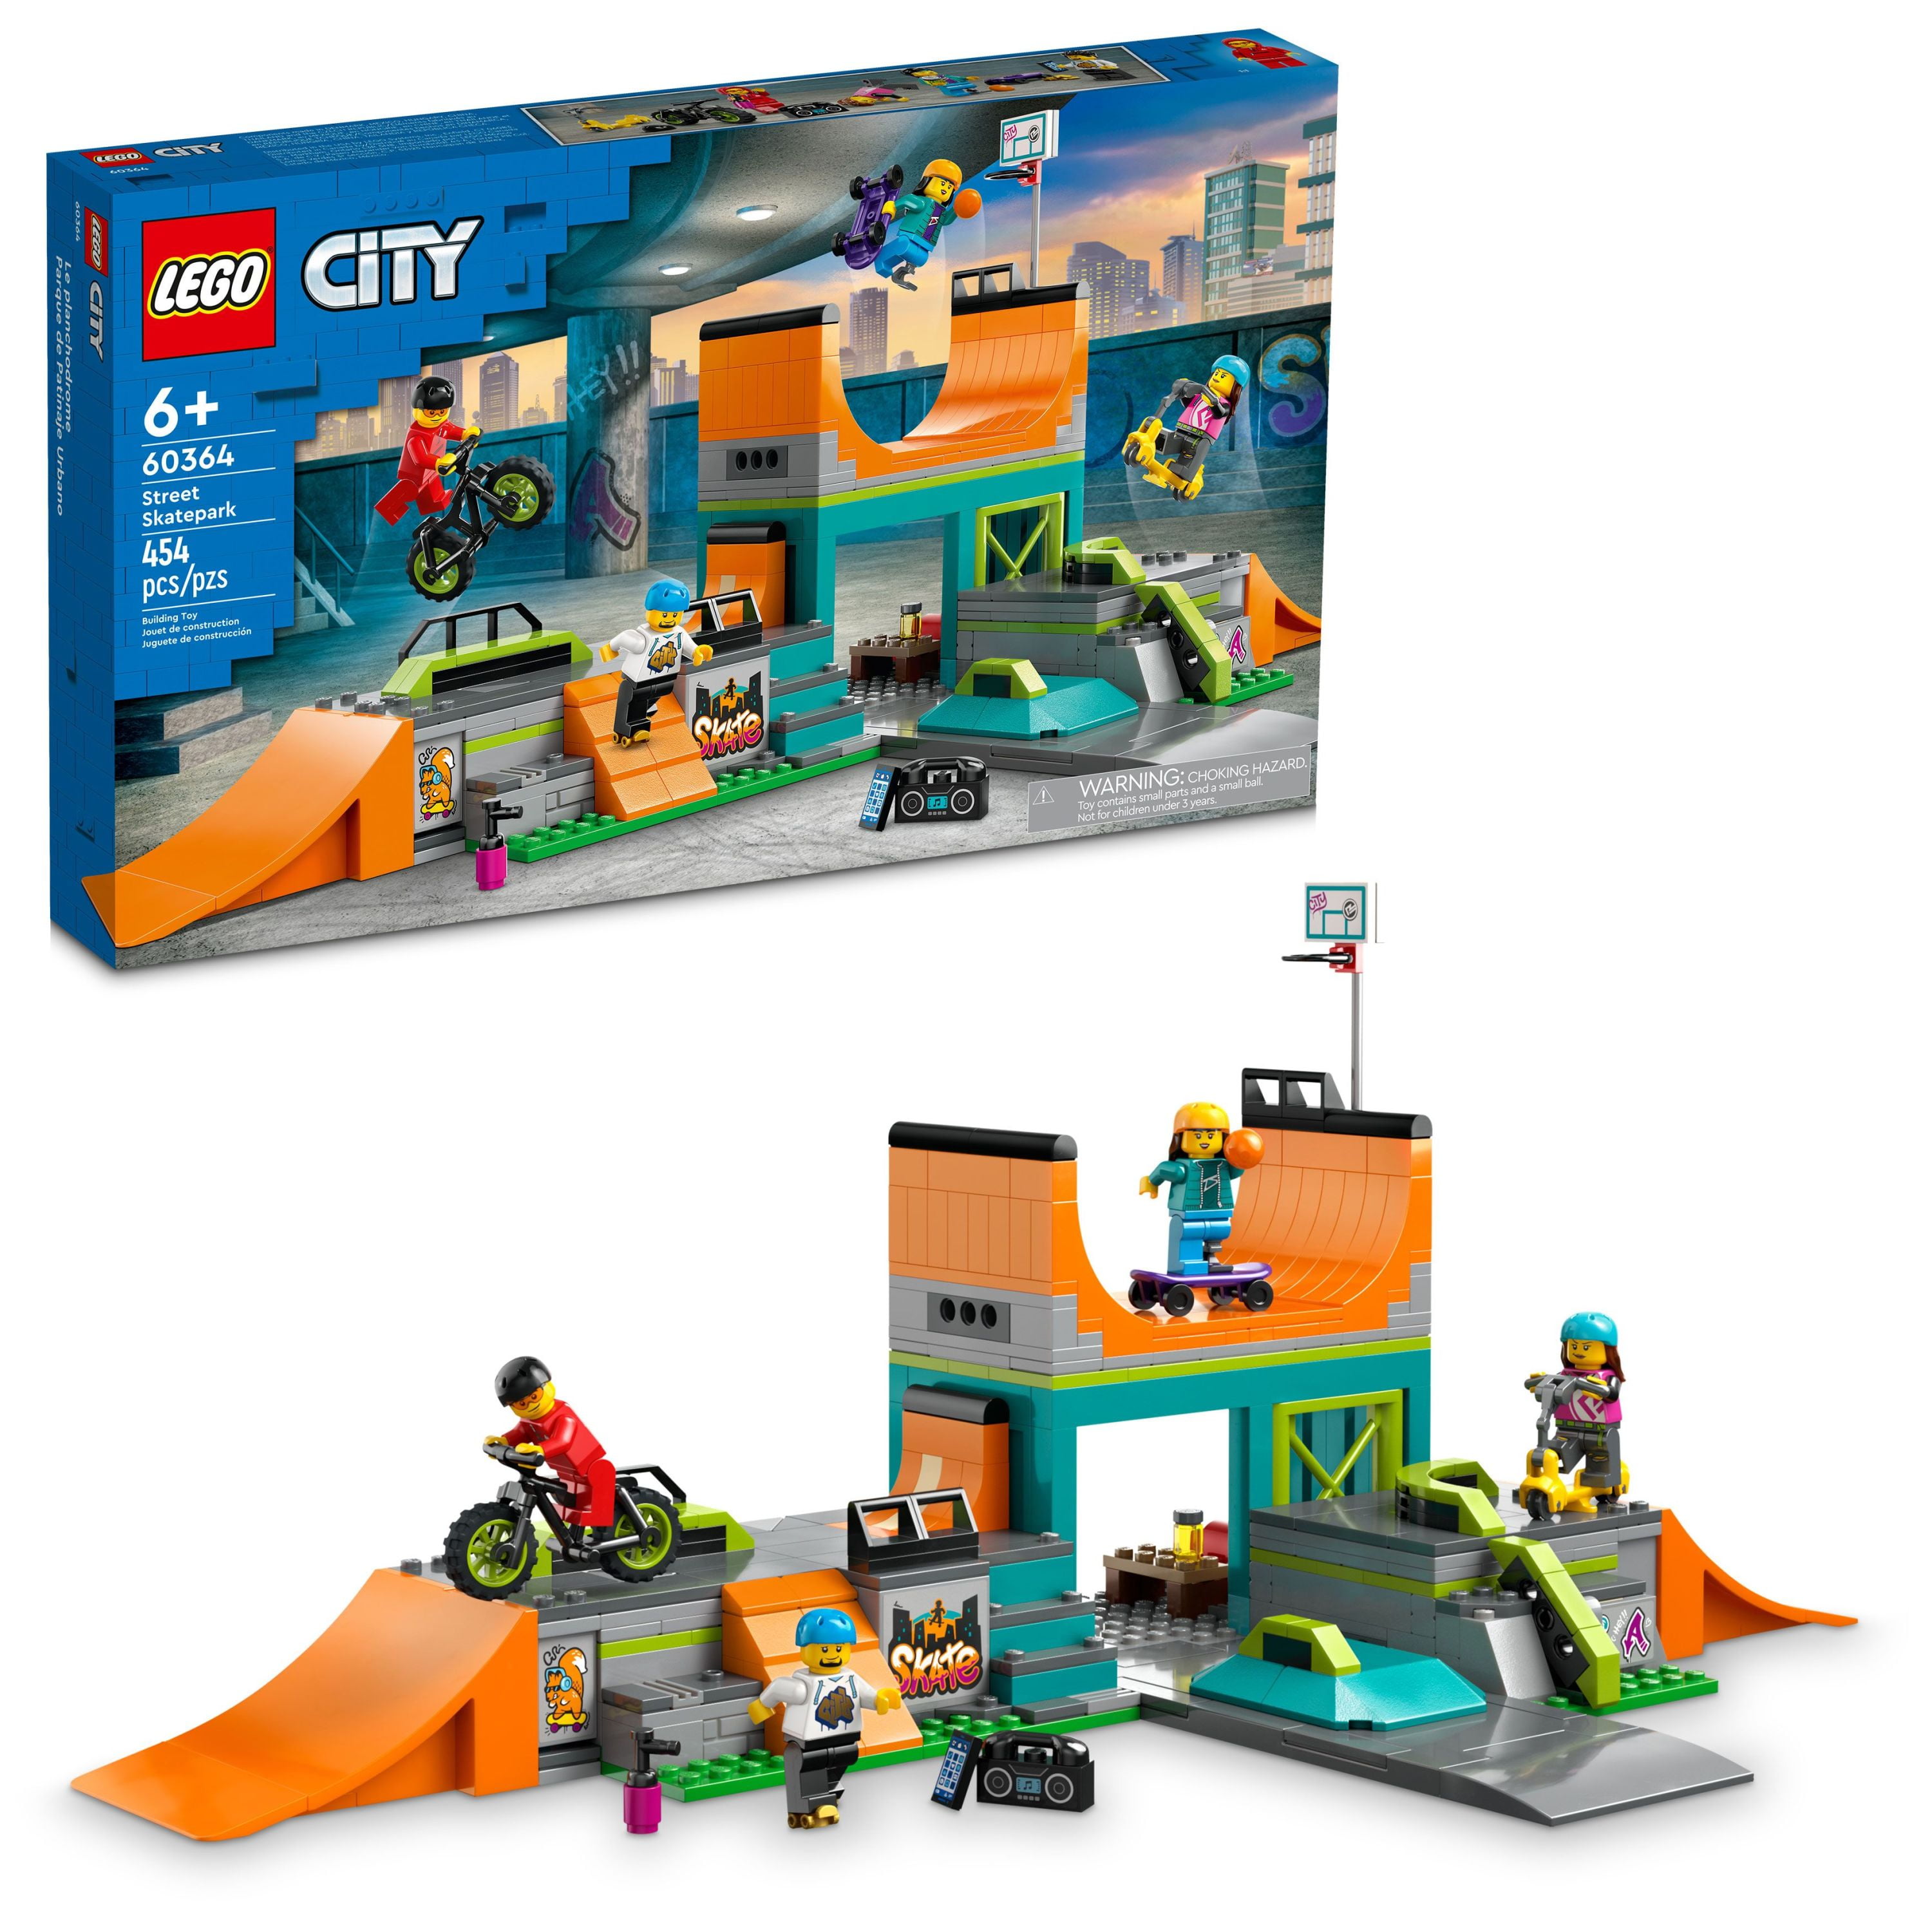 LEGO My City Street Skate Park 60364 Building Toy Set, Includes a  Skateboard, BMX Bike, Scooter and In-line Skates, Plus 4 Minifigures for  Pretend